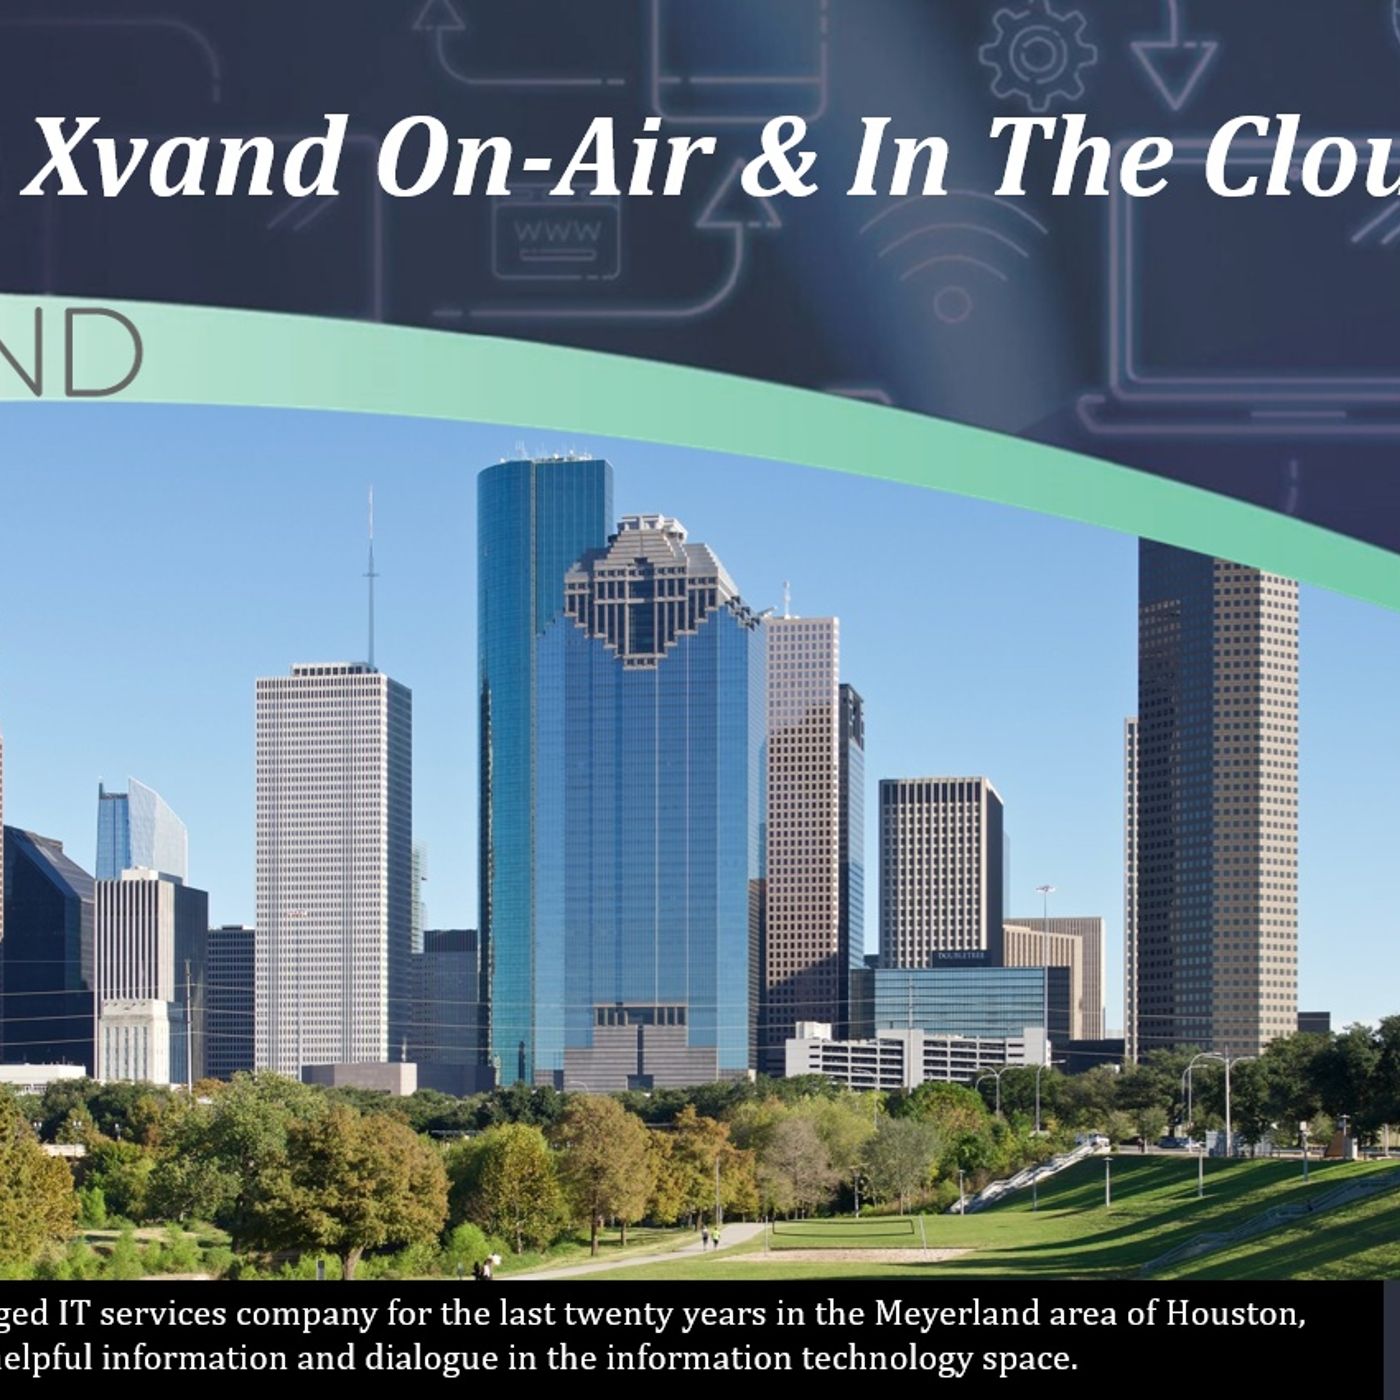 Xvand On-Air & In The Cloud Presents: An Introduction to Microsoft Teams